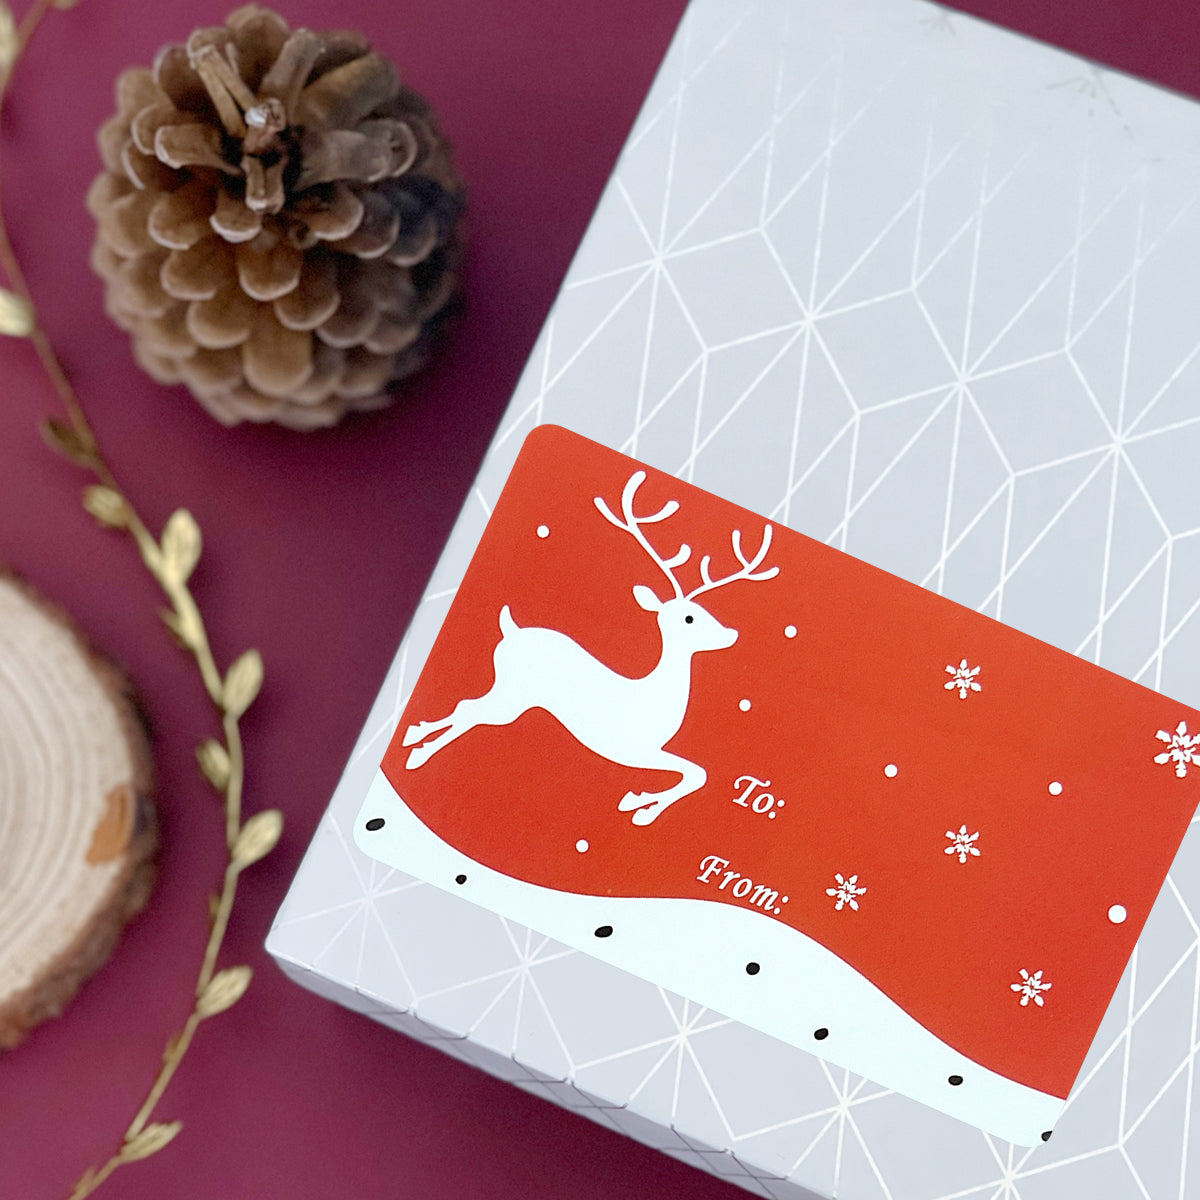 Wrapables Christmas Sticker Labels, Christmas Holiday Adhesive Gift Tags for Gifts & Stationery Reindeer